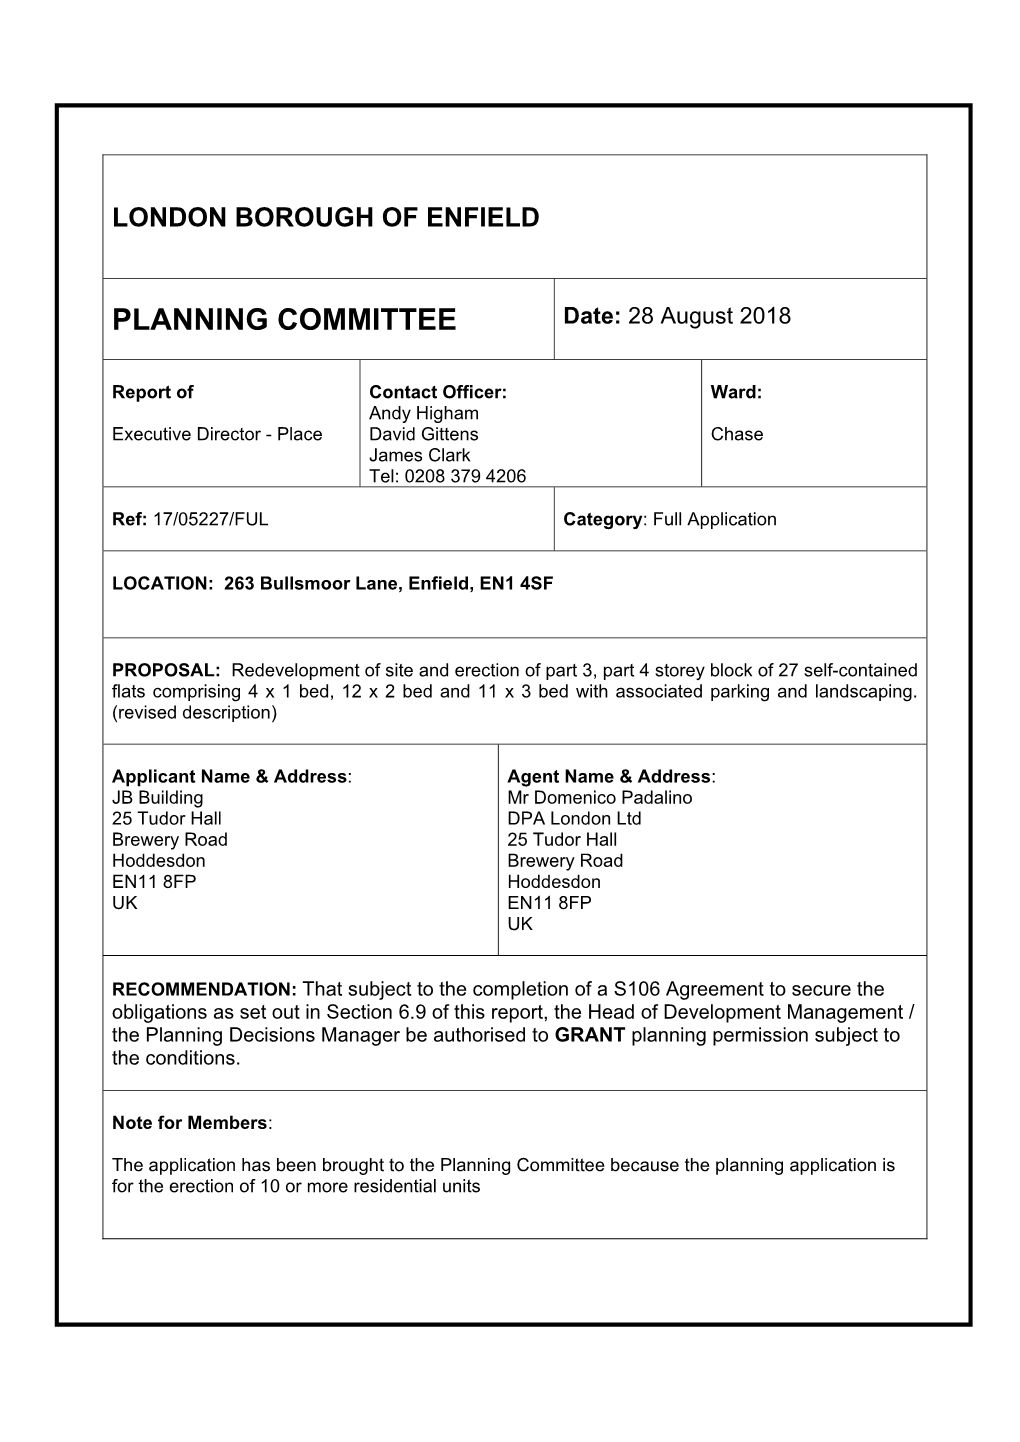 PLANNING COMMITTEE Date: 28 August 2018